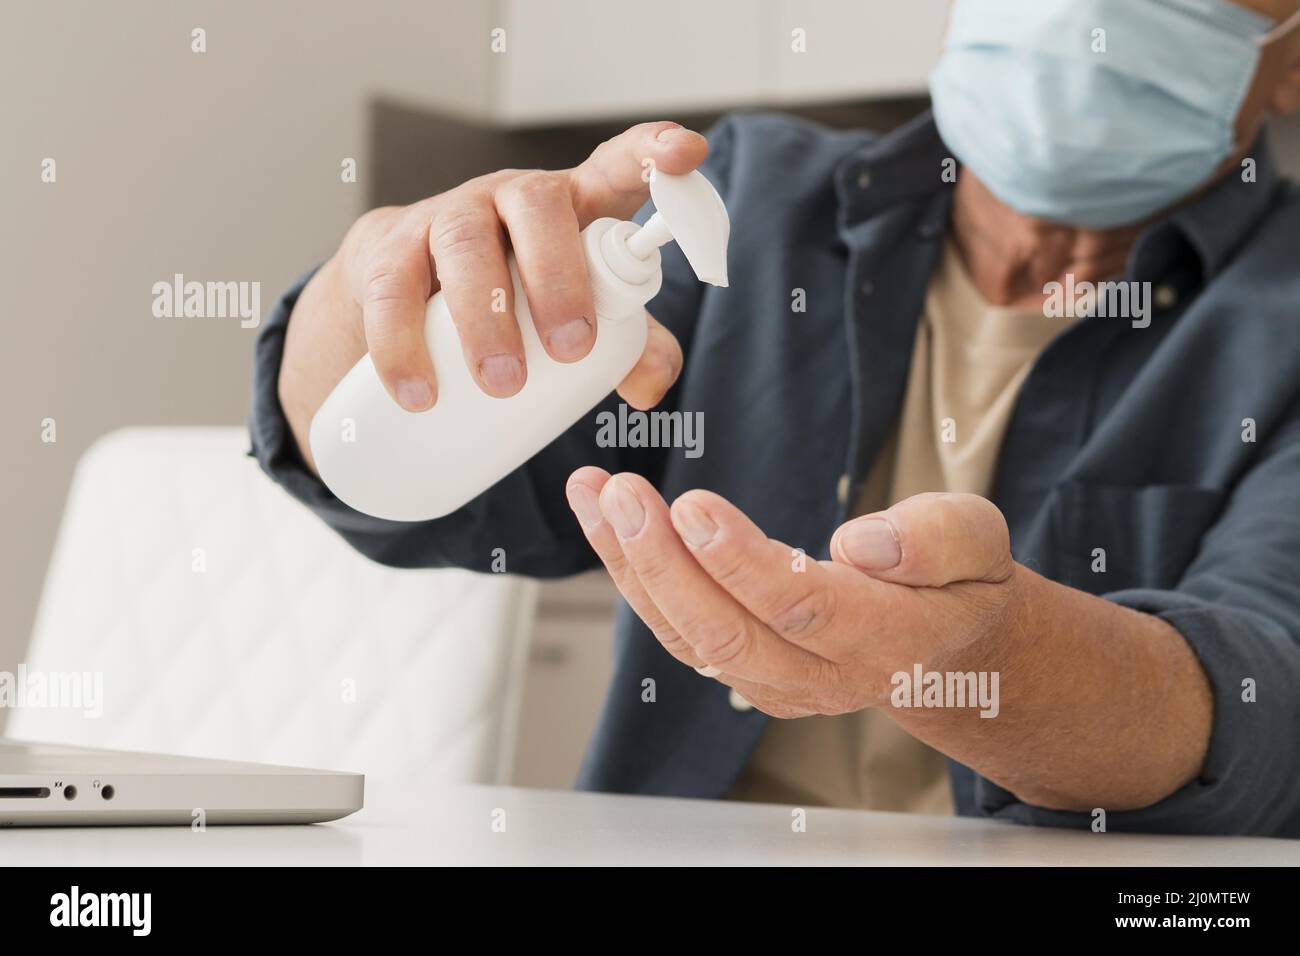 Close up man using disinfectant Stock Photo